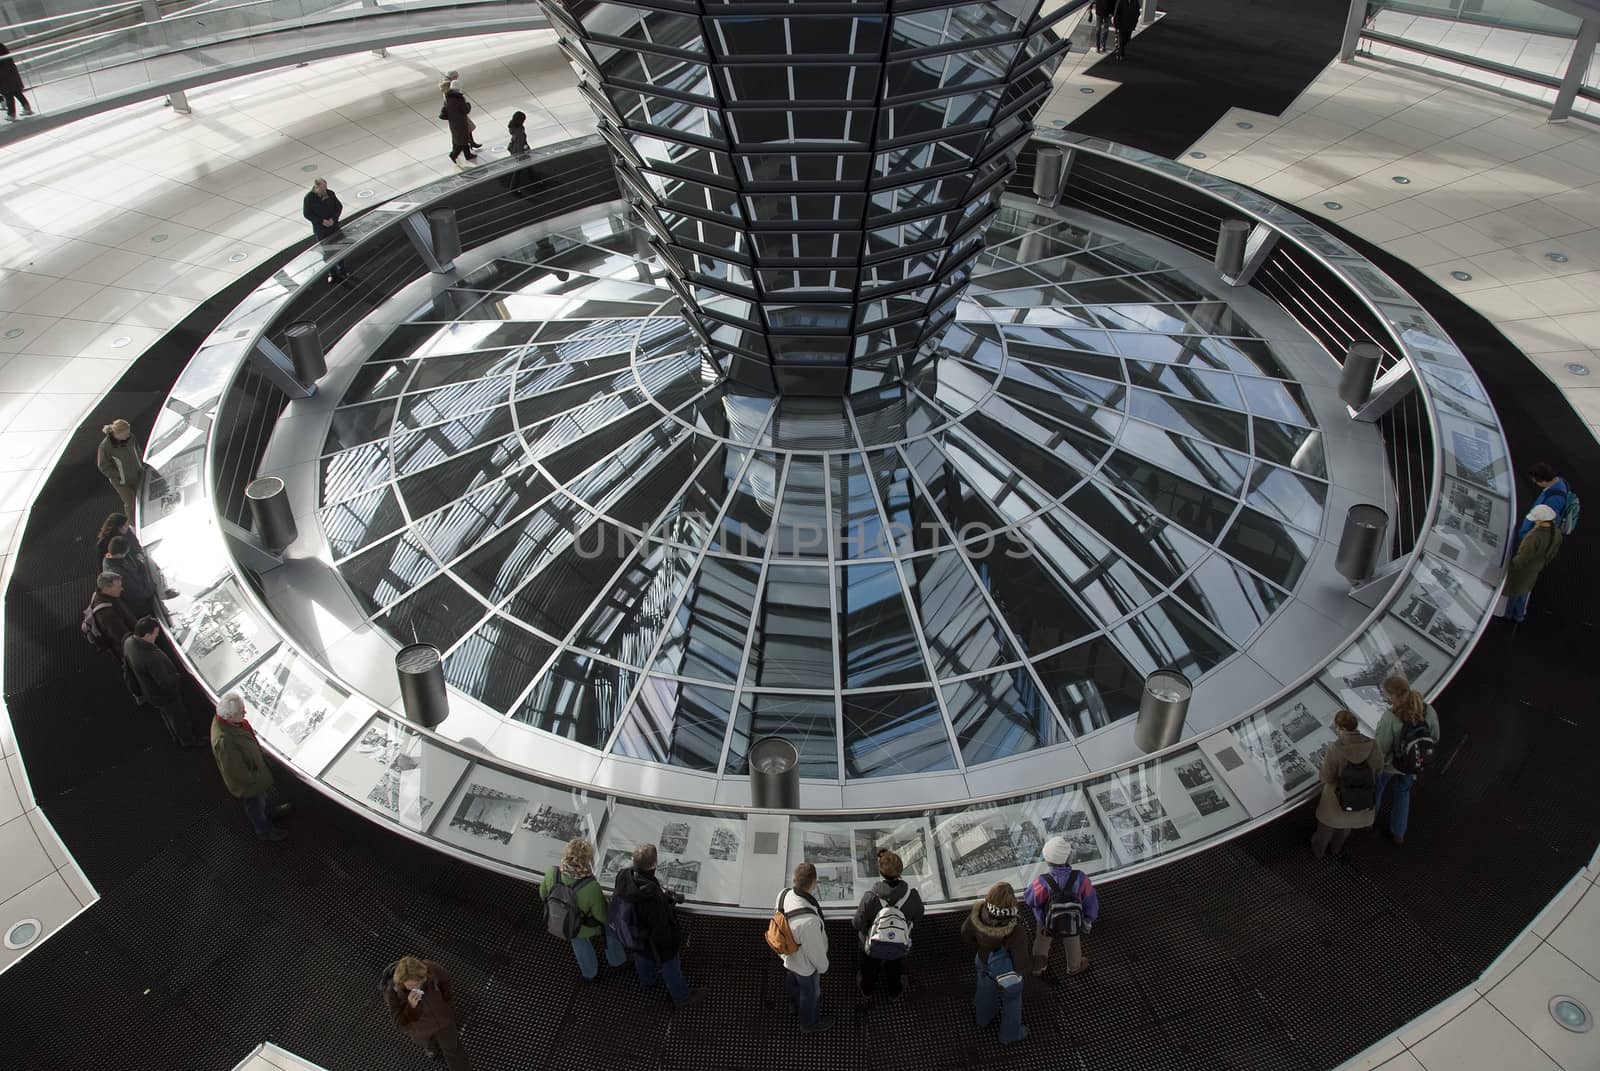 The Cupola on top of the Reichstag building in Berlin by compuinfoto